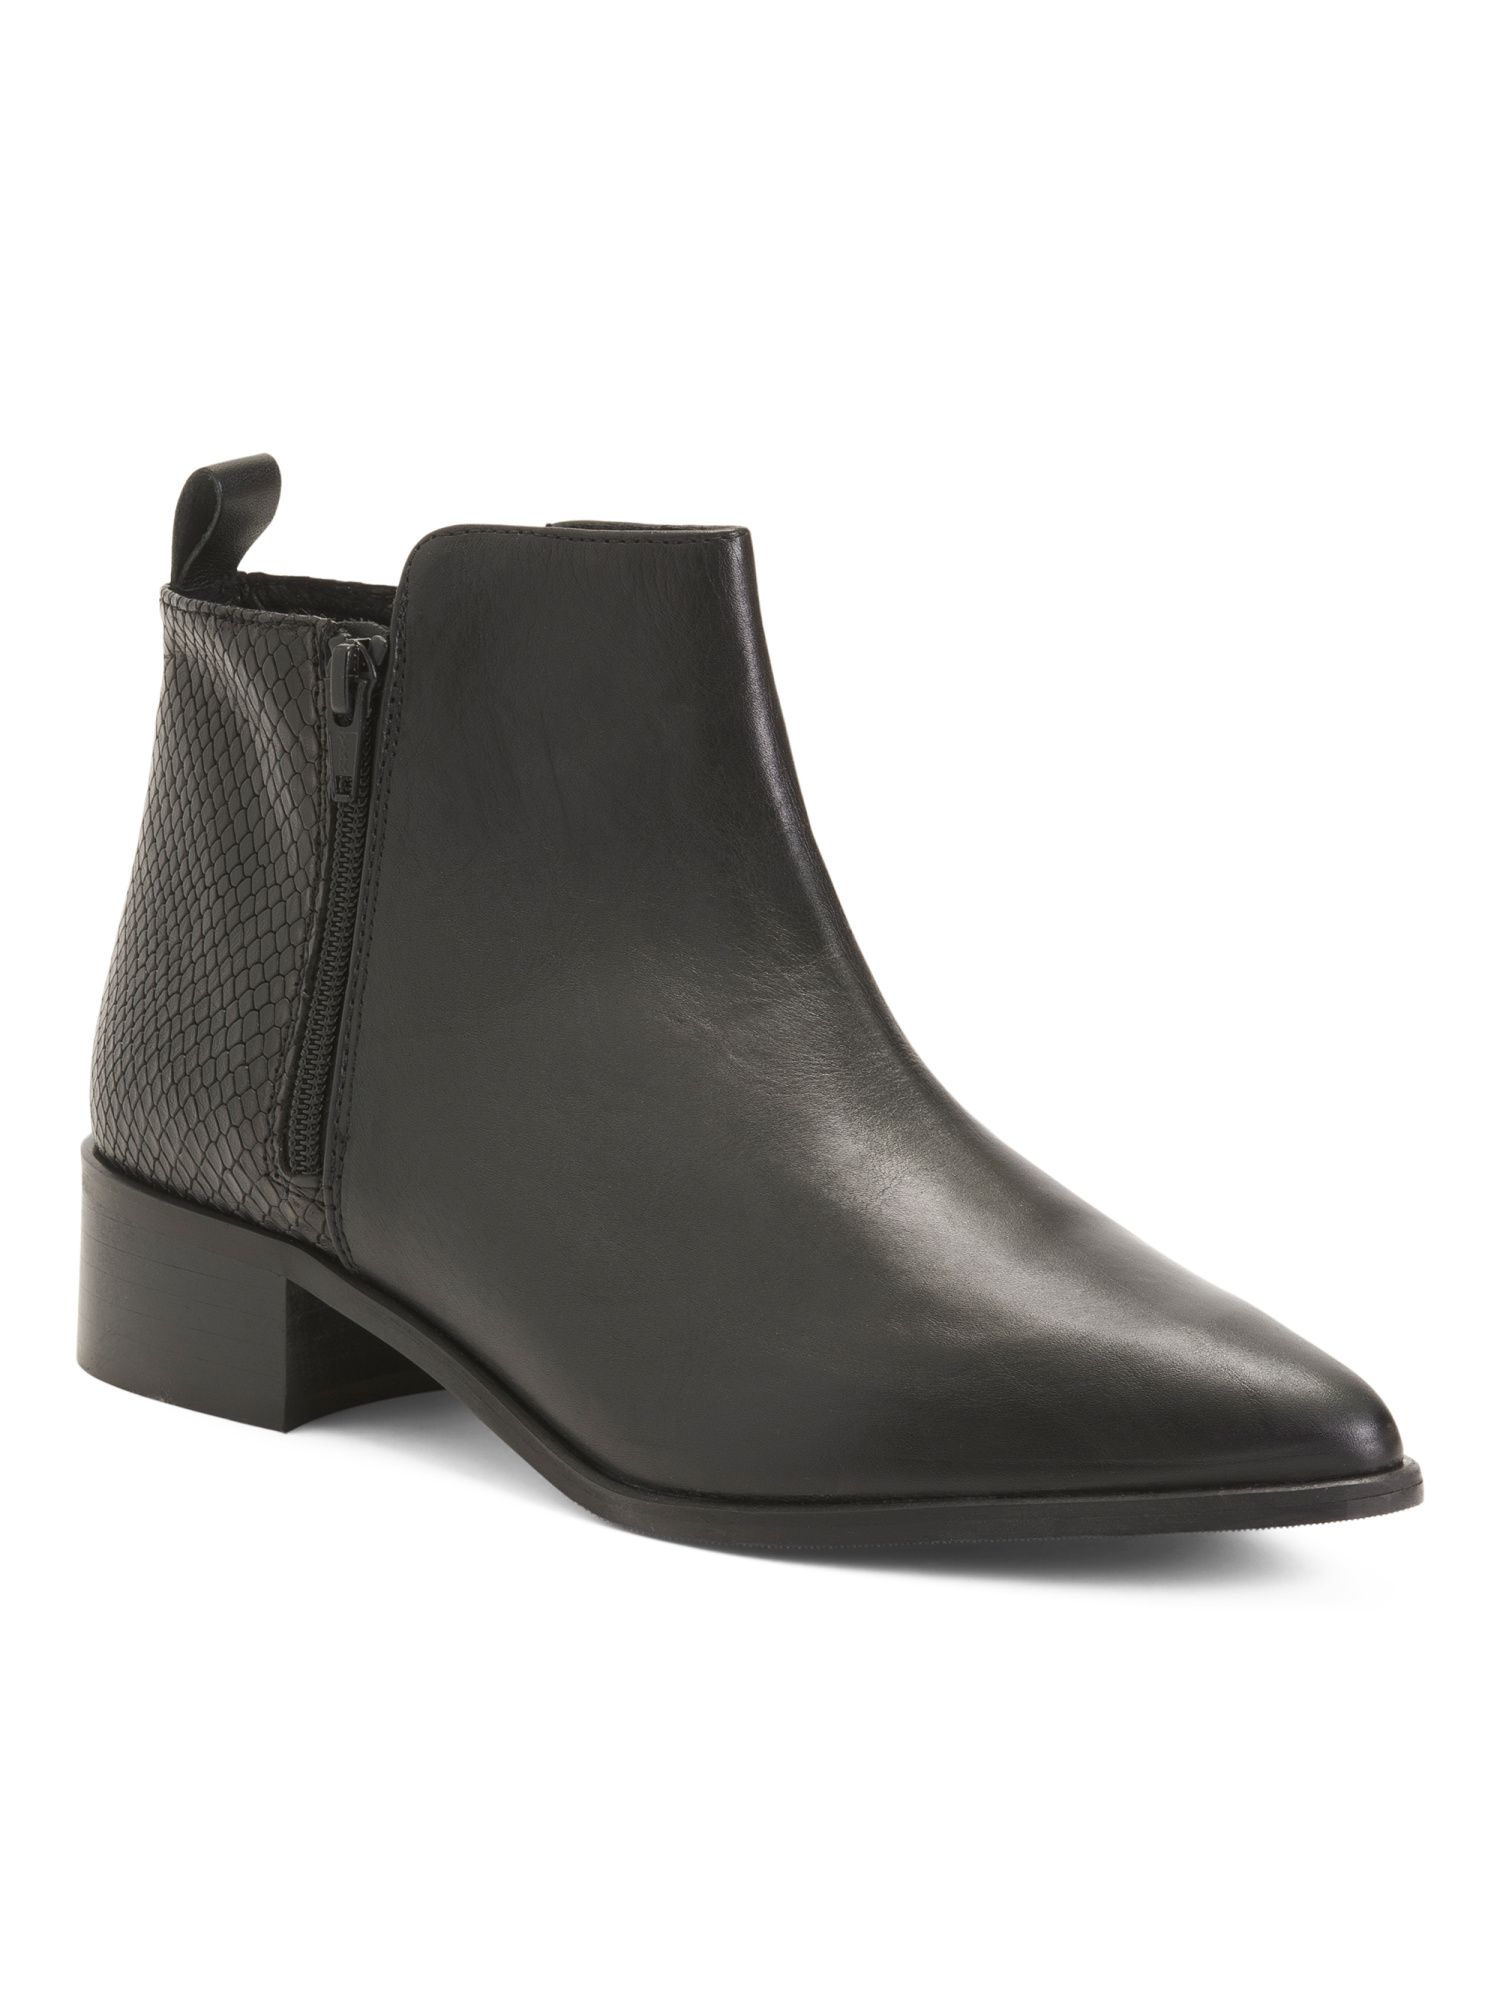 Made In Italy Leather Lizard Back Booties | TJ Maxx